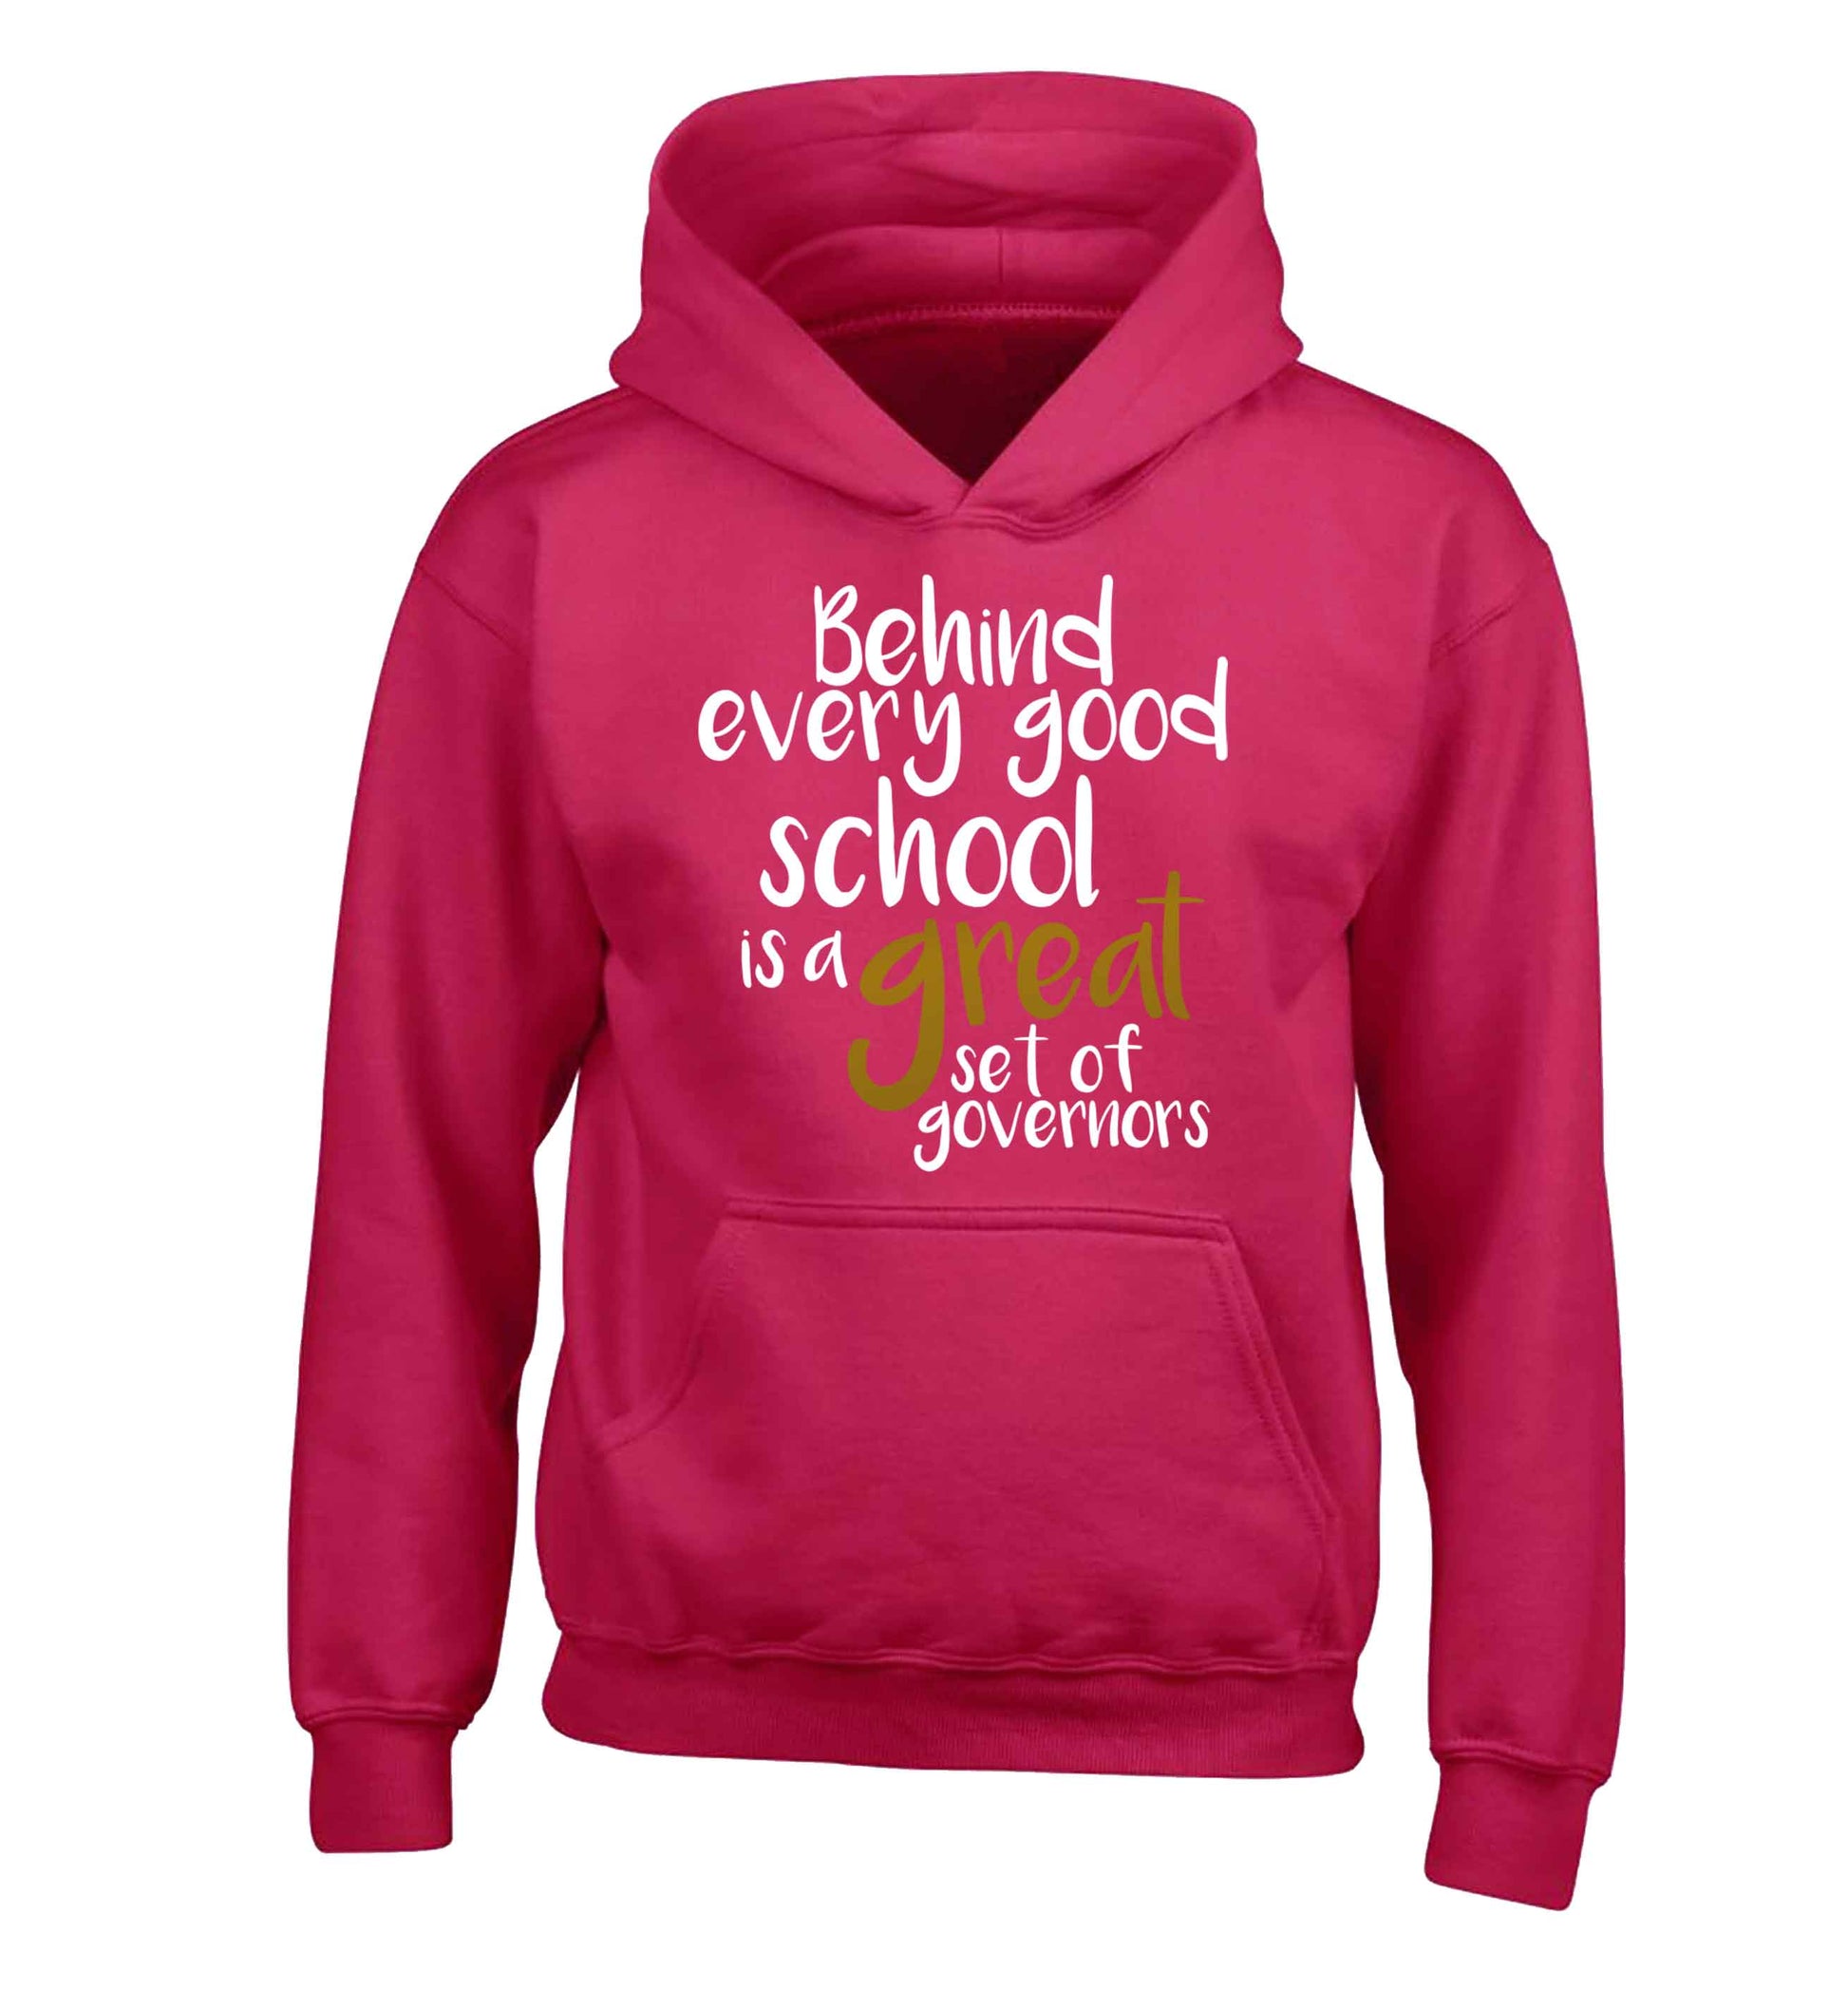 Behind every good school is a great set of governors children's pink hoodie 12-13 Years